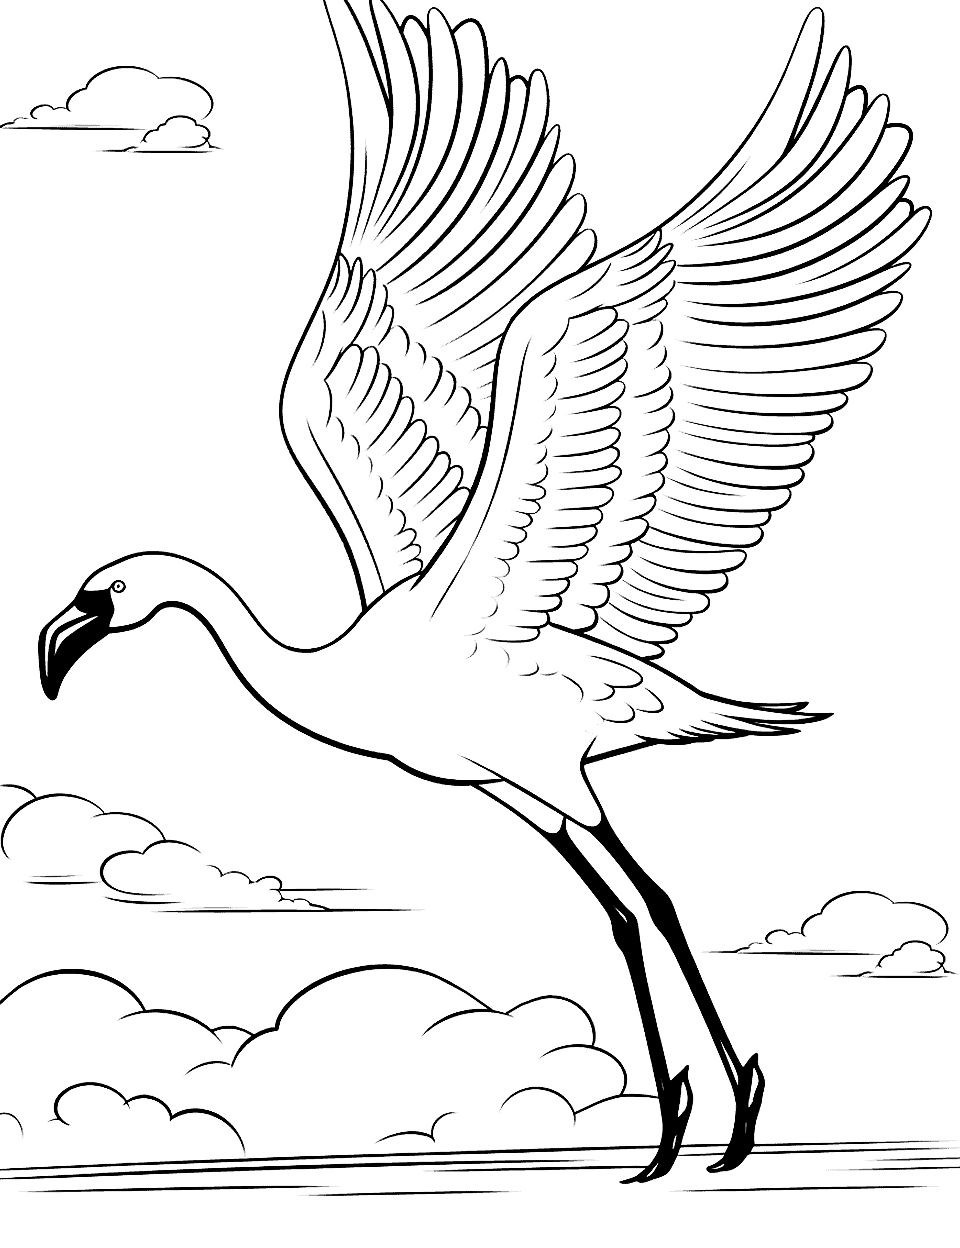 Flying Flamingo in the Sky Coloring Page - A majestic flamingo in mid-flight, with clouds in the background, showcasing the beauty of flight.